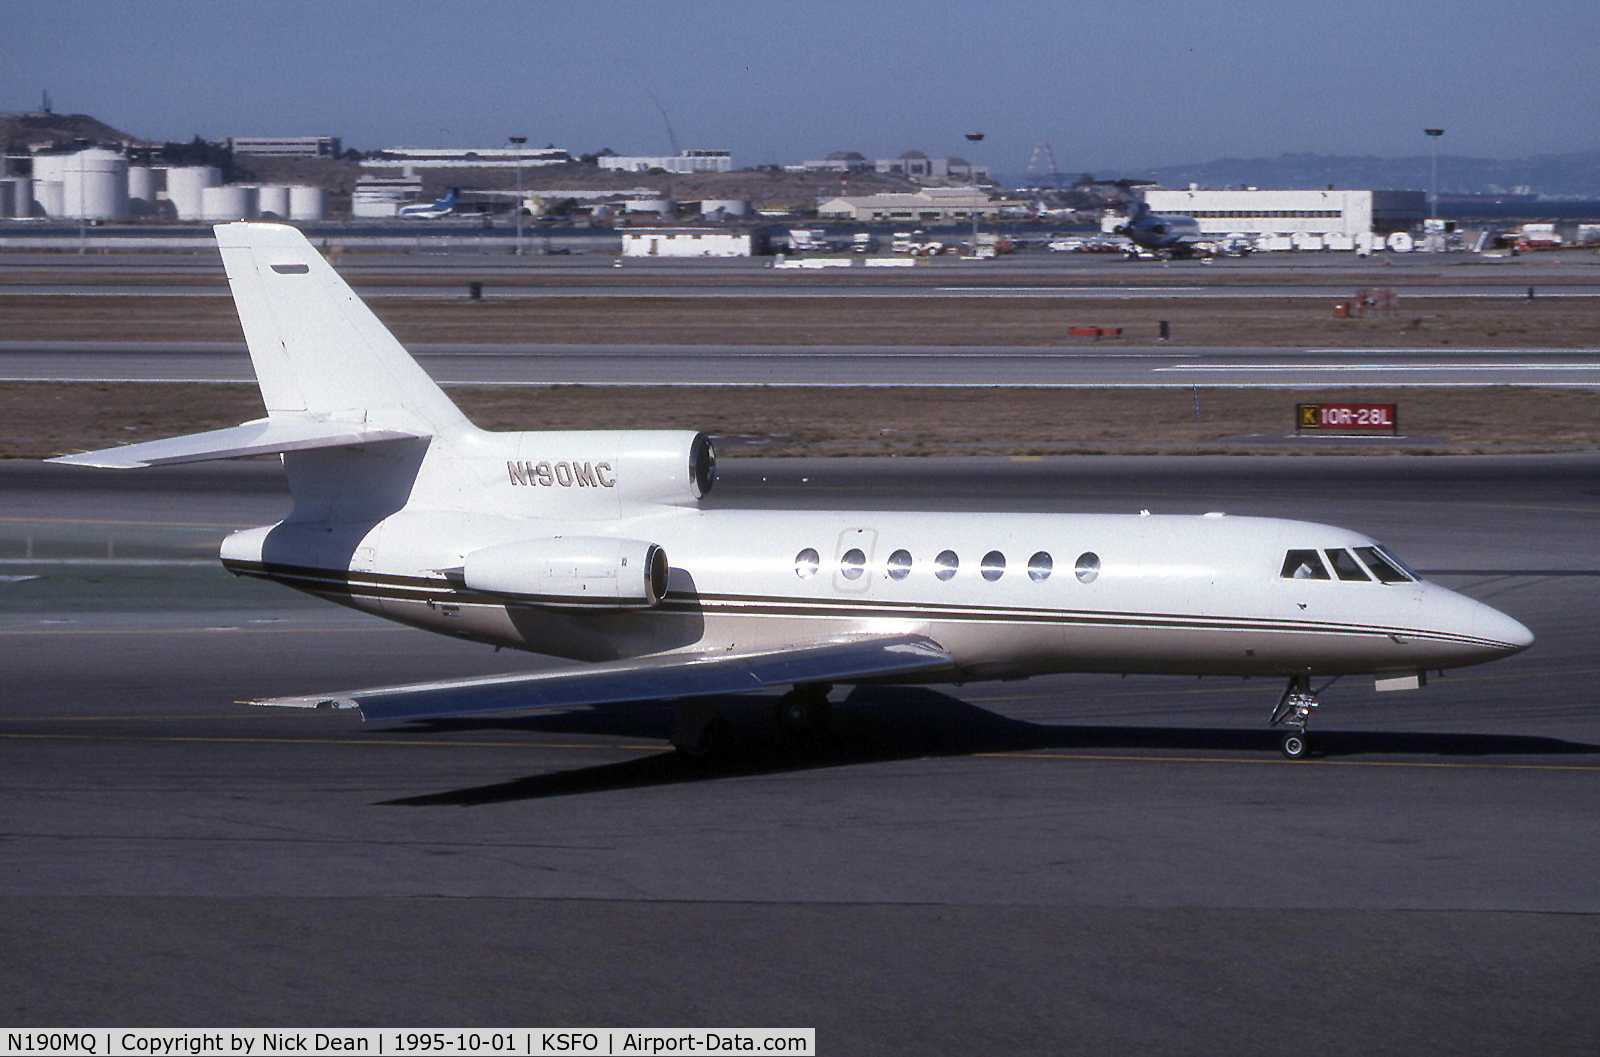 N190MQ, 1980 Dassault Falcon 50 C/N 26, KSFO (Seen here as N190MC now carried by a 2000 the 50 is currently registered N190MQ as posted)